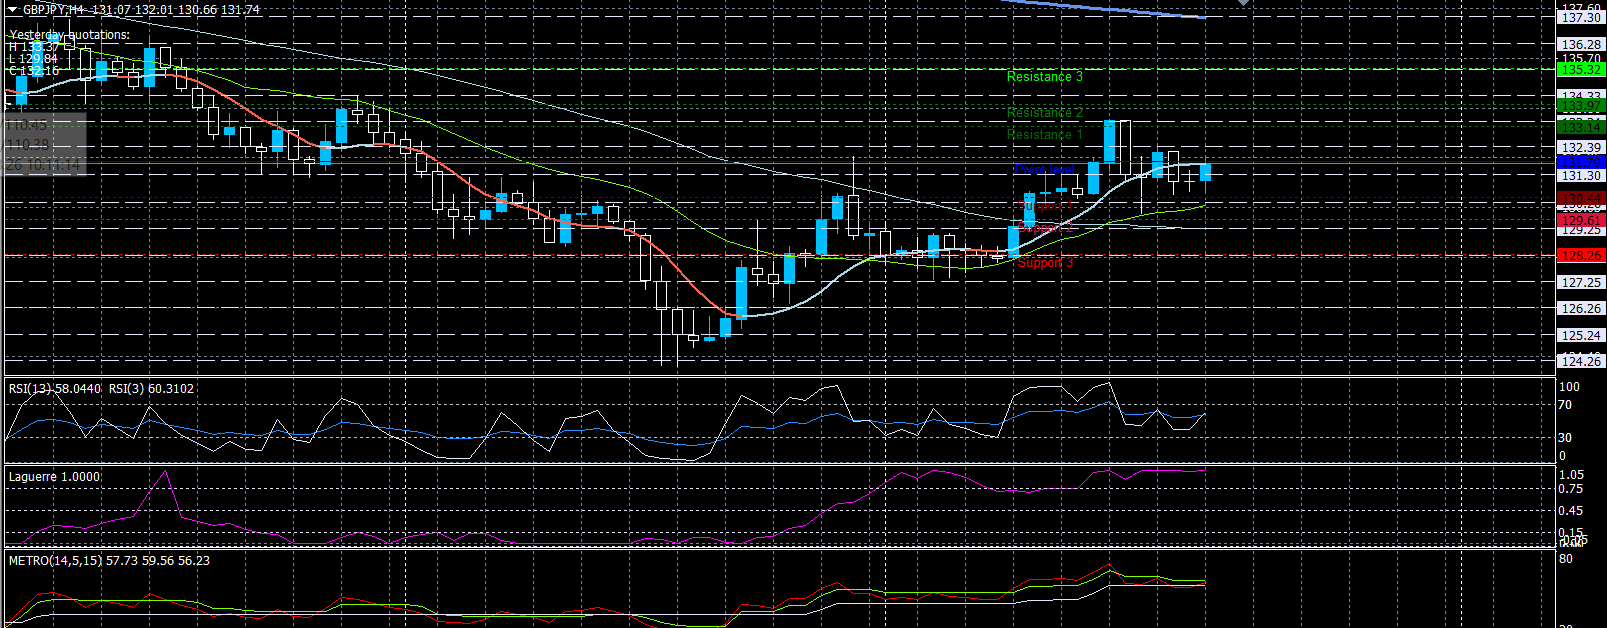 GBPJPY26032020.png